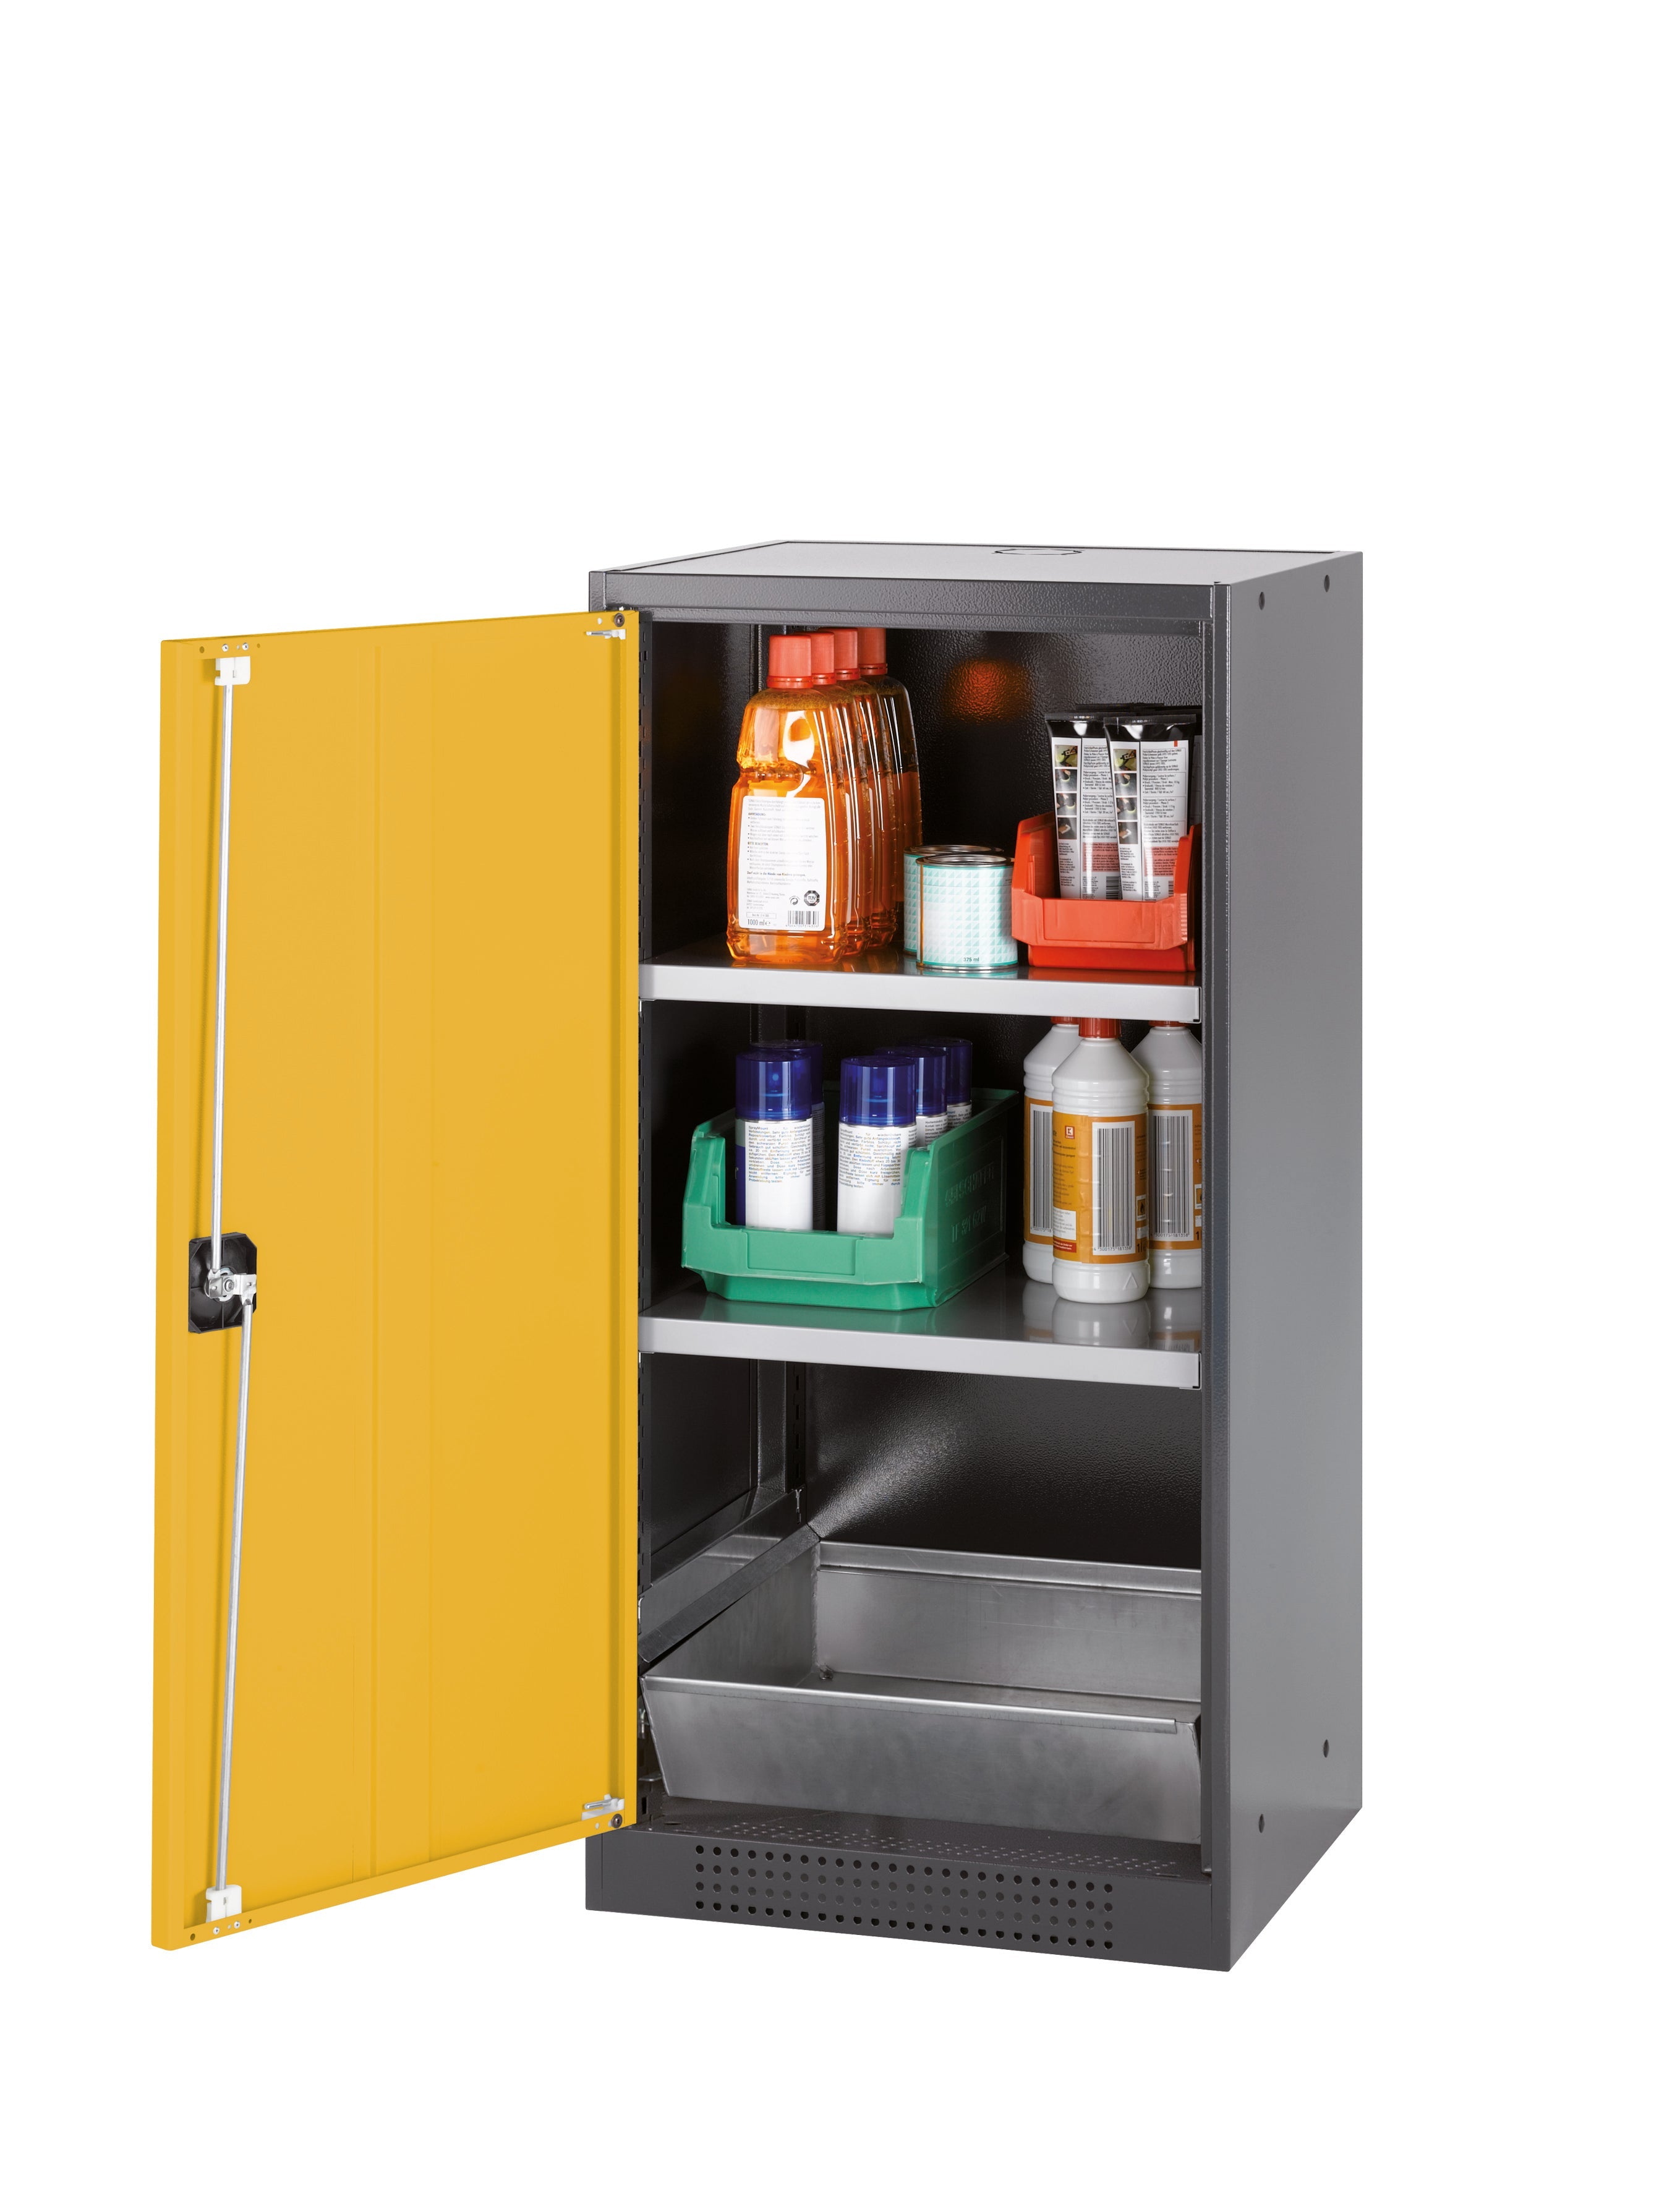 Chemical cabinet CS-CLASSIC model CS.110.054 in safety yellow RAL 1004 with 2x standard shelves (sheet steel)